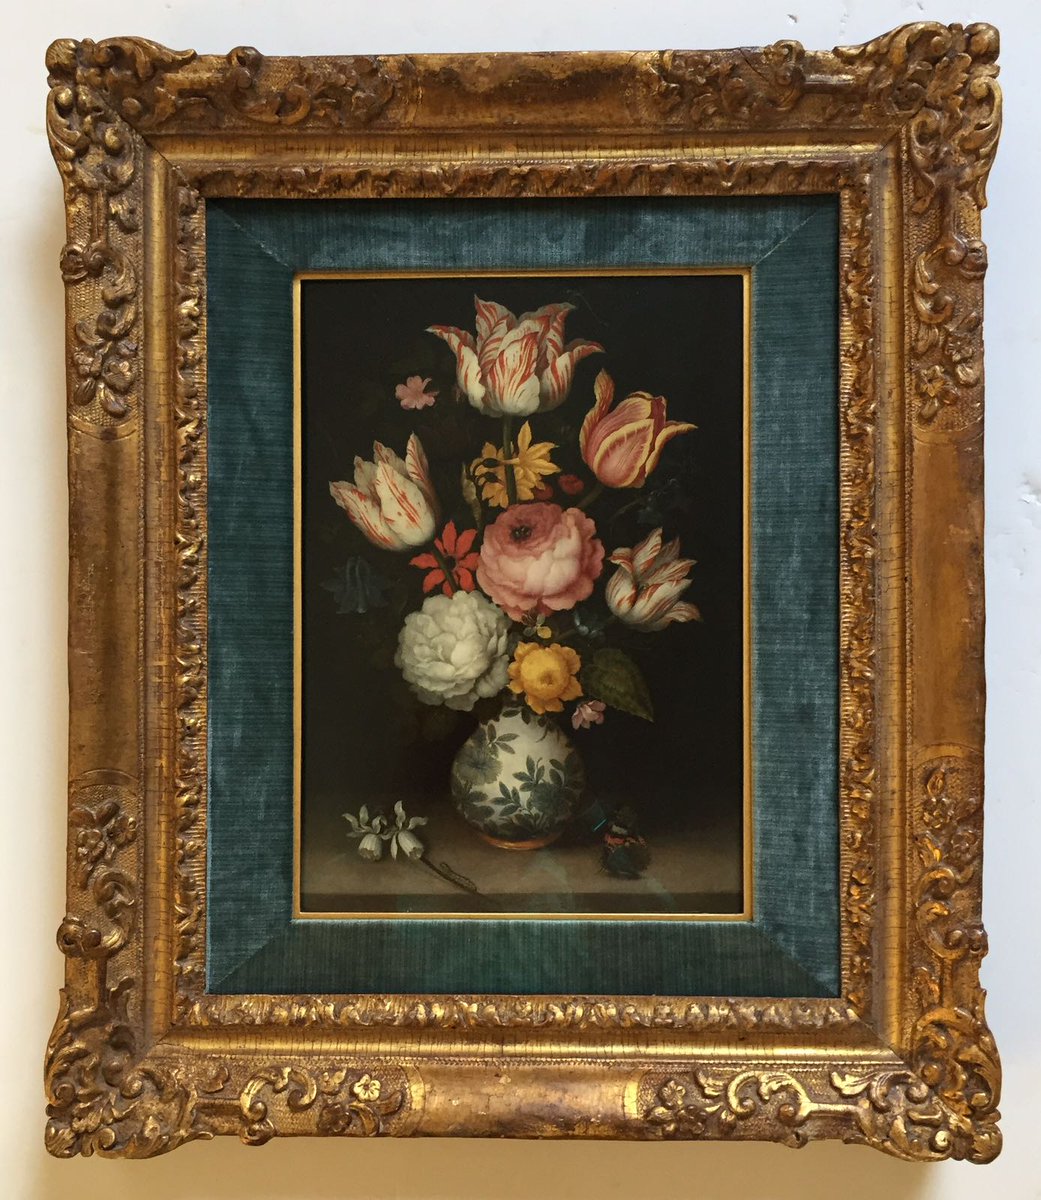 #Bosschaert sold for £3m at #Sothebys last night - here's one in an alternative #antiqueframe